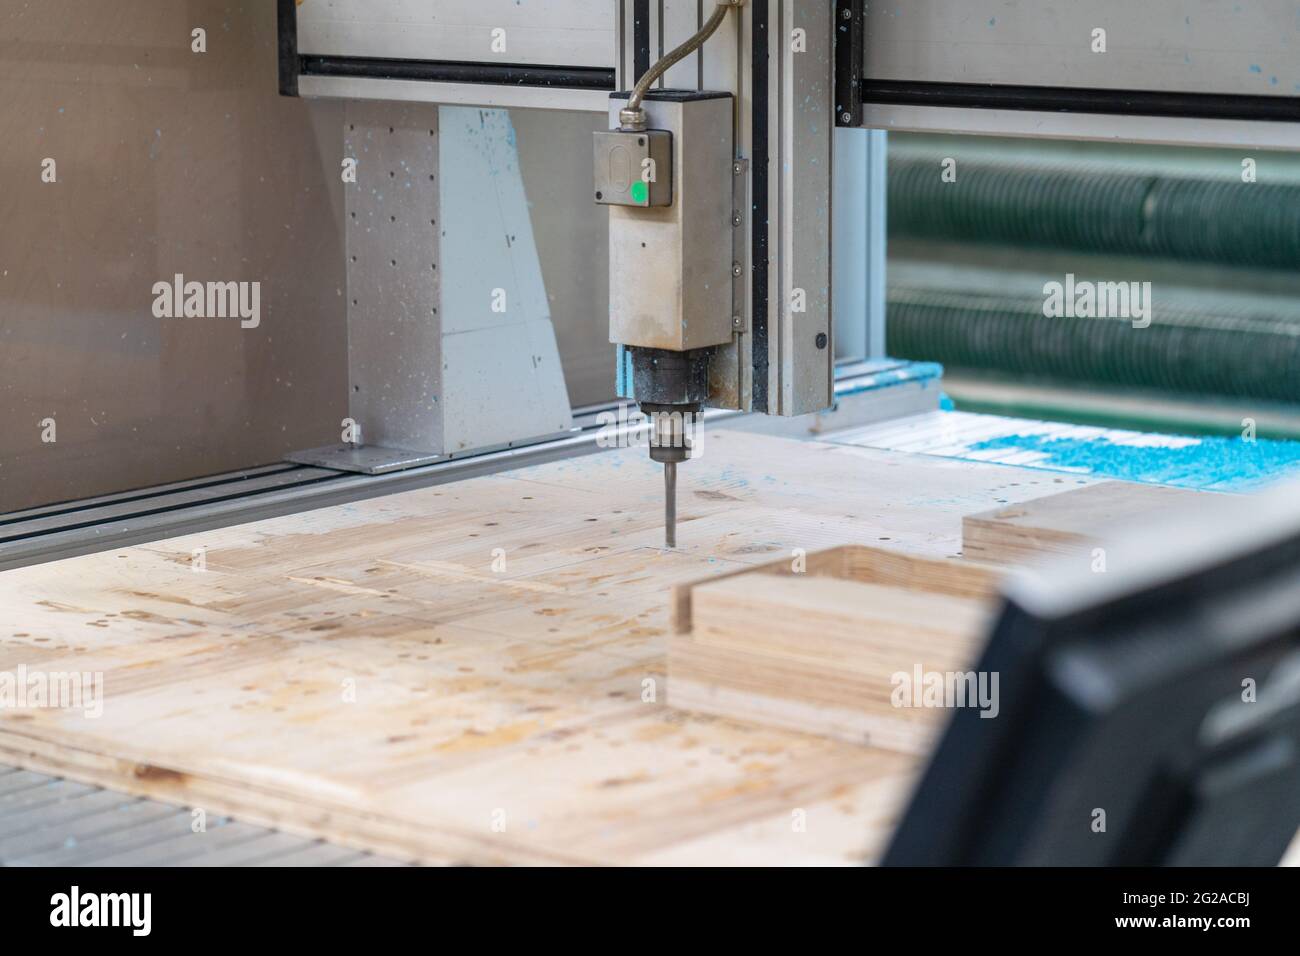 Cnc machine at work process cutting wood with drill, close up. Stock Photo